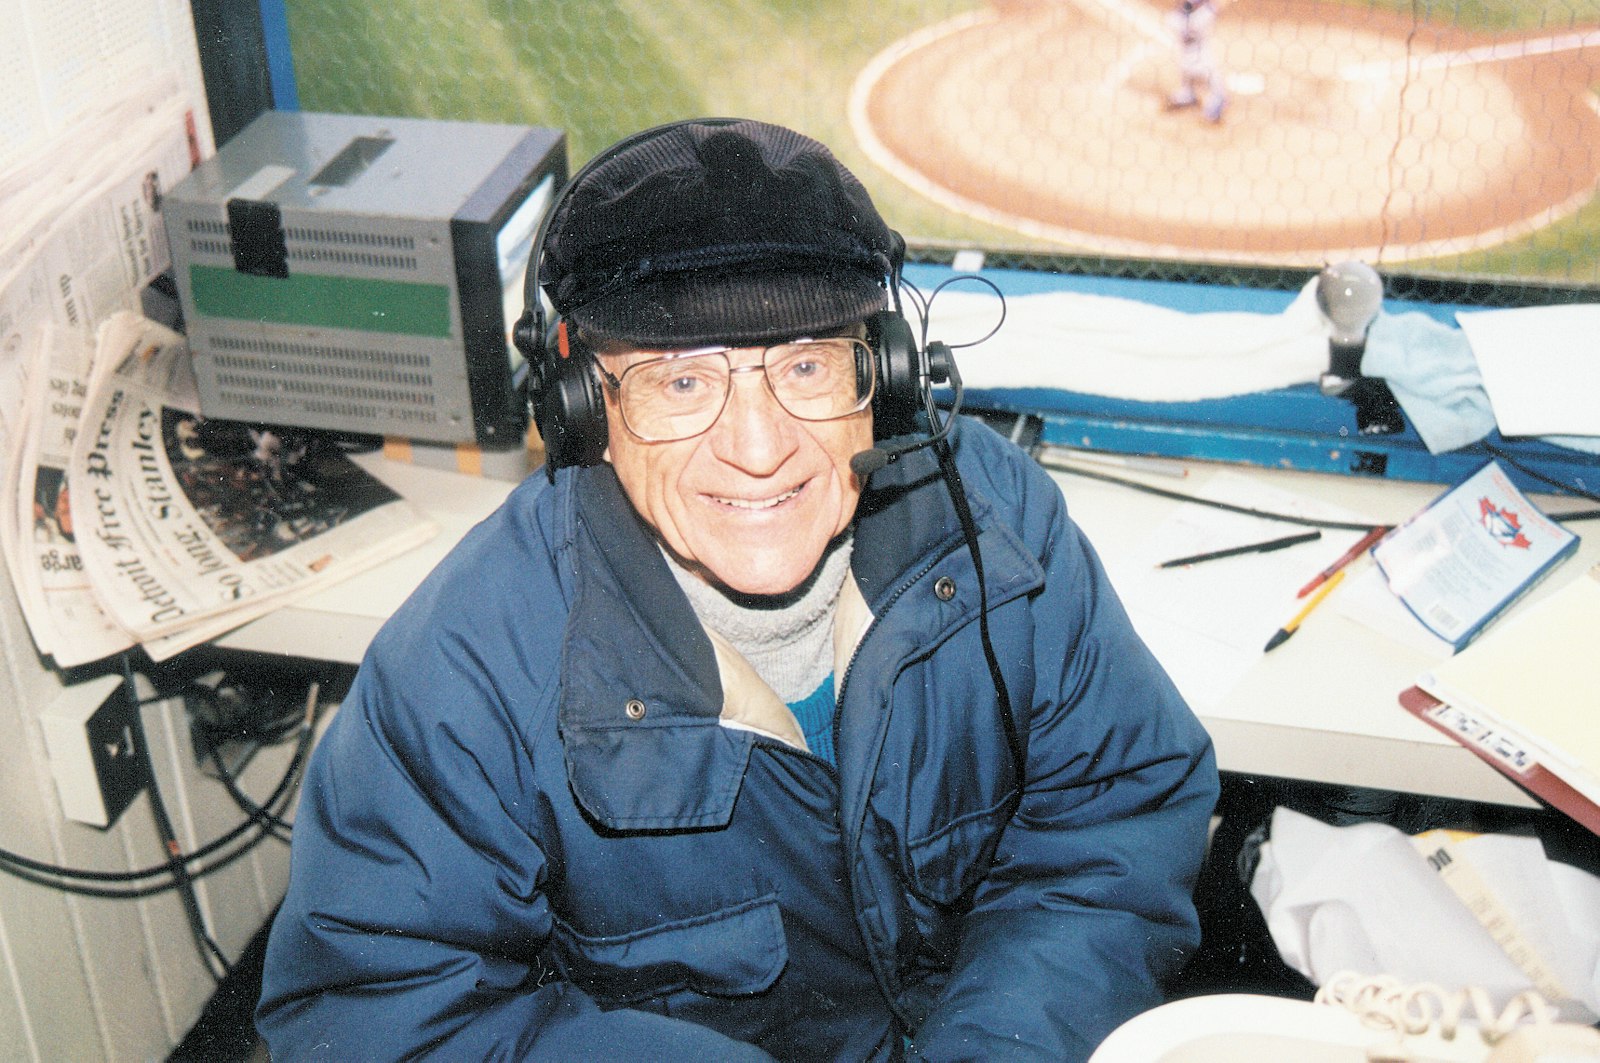 Ernie Harwell was the beloved voice of the Detroit Tigers for generations and in big ways and in small made a difference in the lives of listeners. (Michigan Catholic file photo via Detroit Tigers)